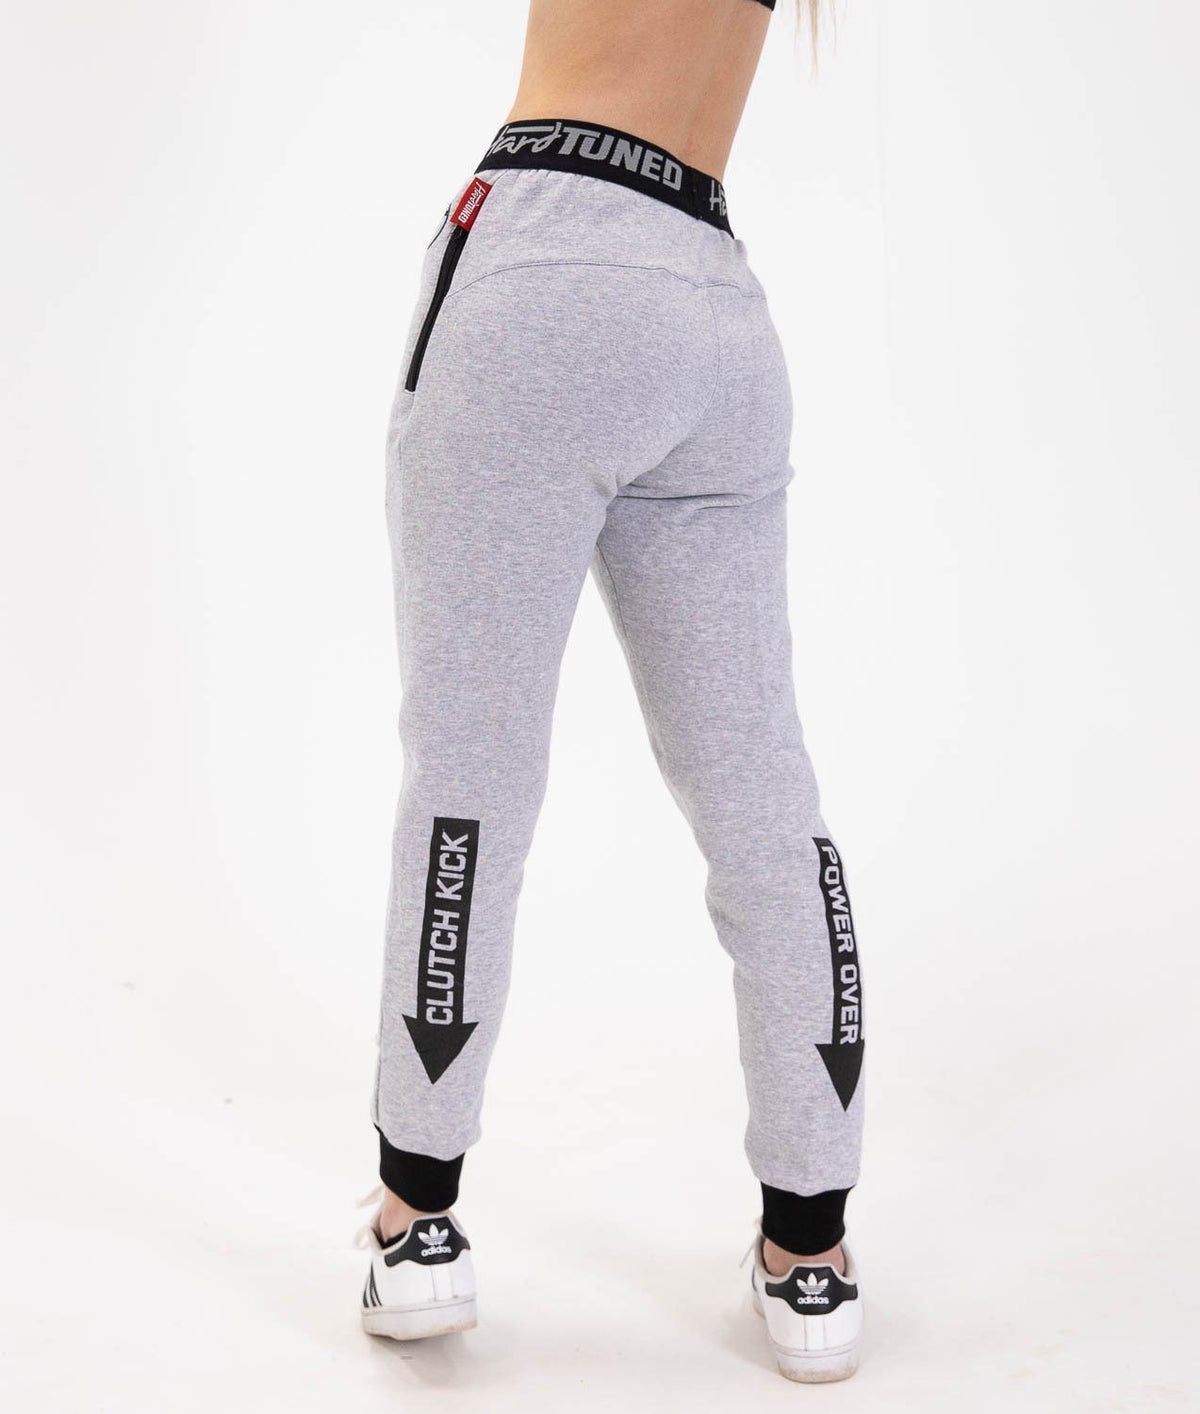 Beyond Yoga Track pants and sweatpants for Women